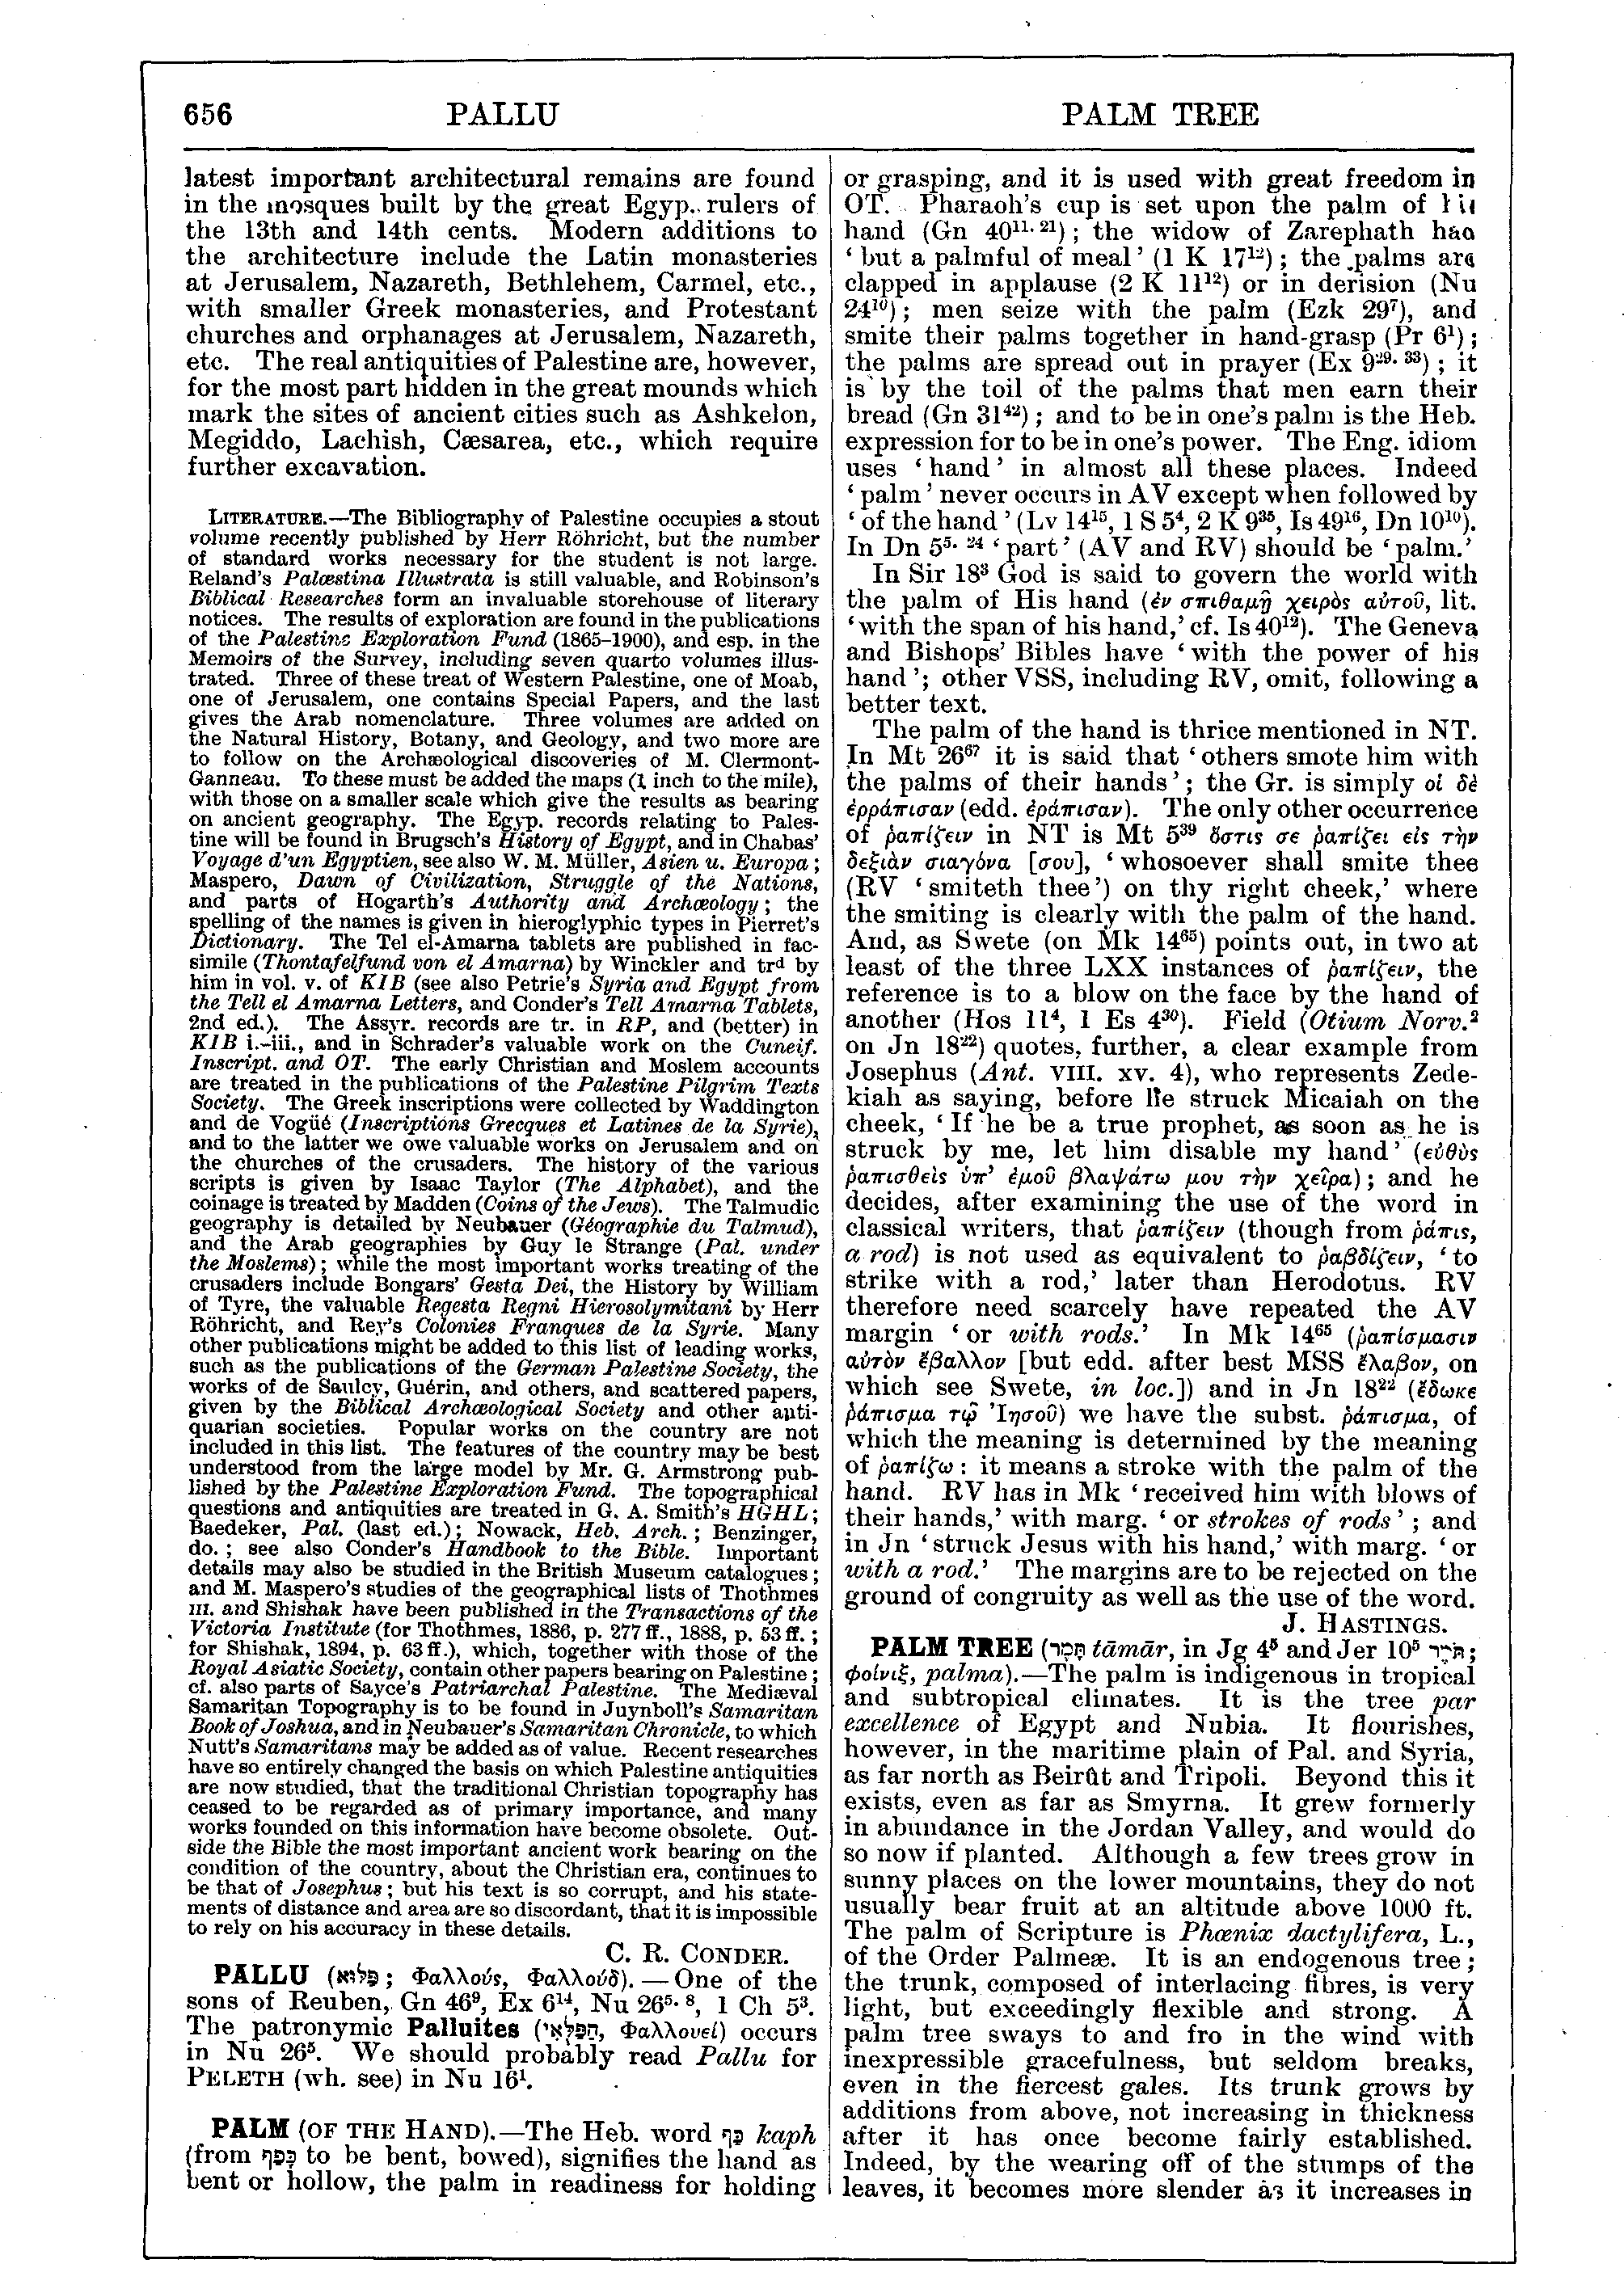 Image of page 656